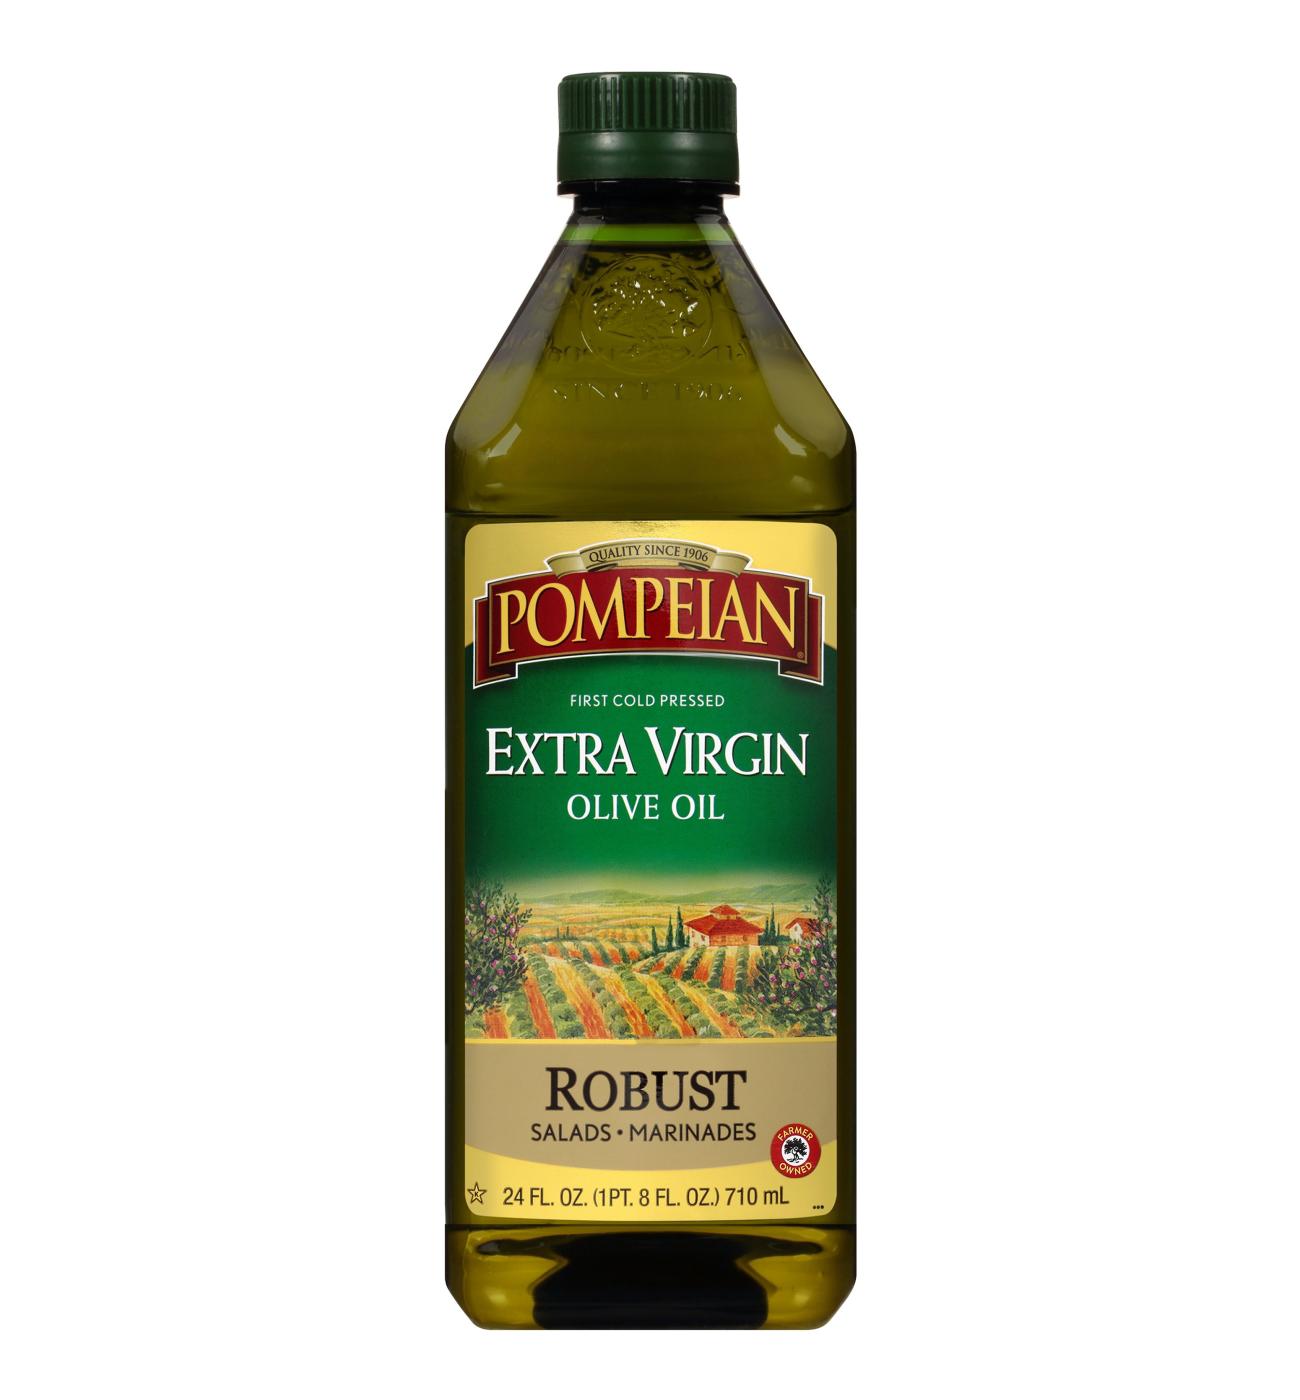 Pompeian Robust Extra Virgin Olive Oil; image 1 of 2